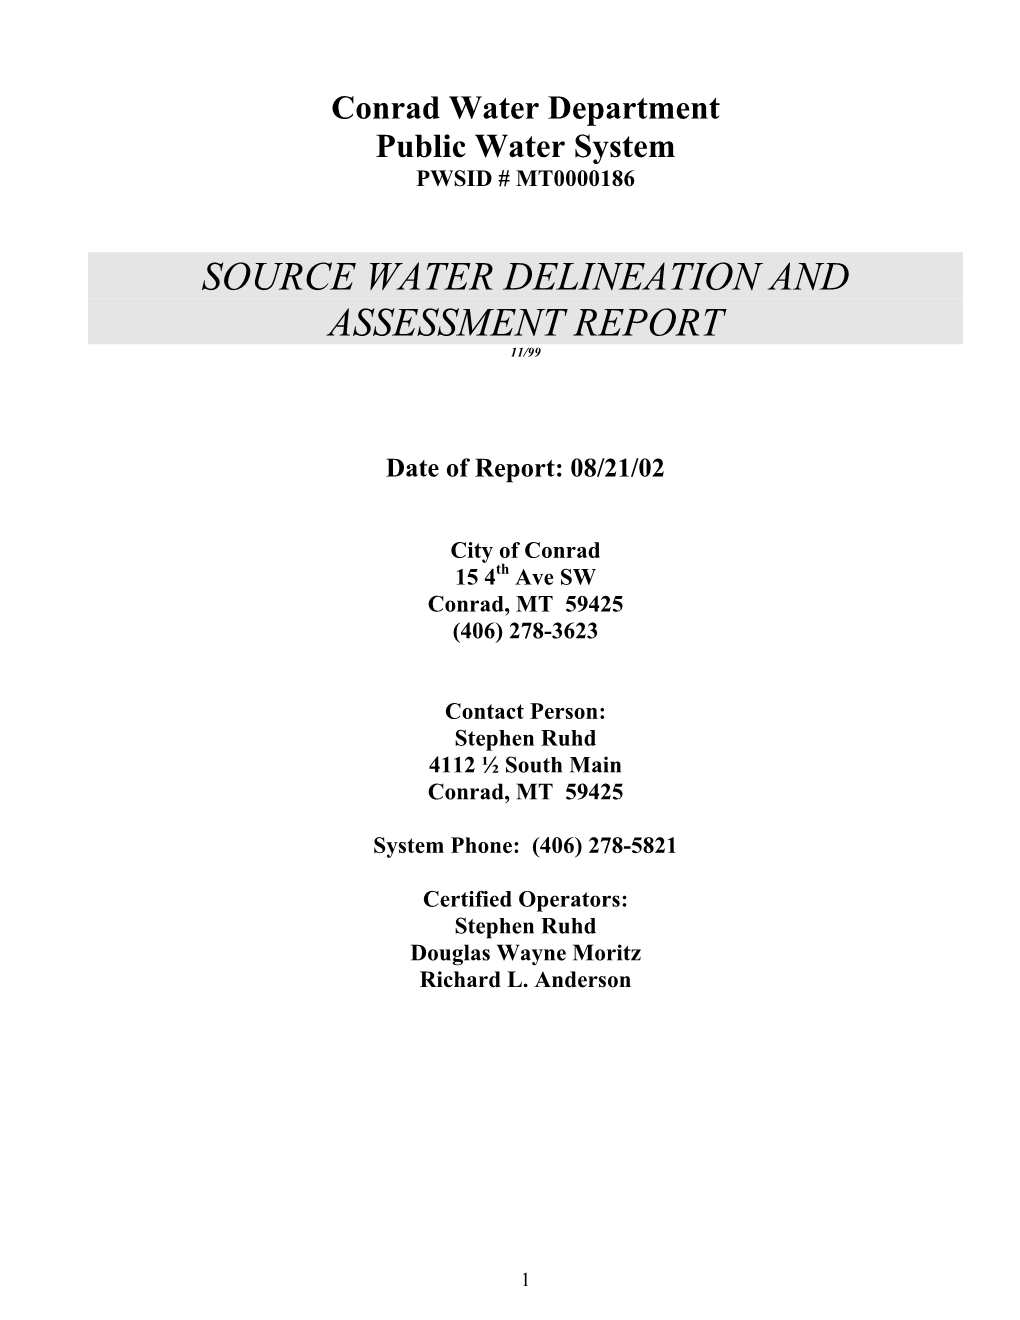 Source Water Delineation and Assessment Report 11/99